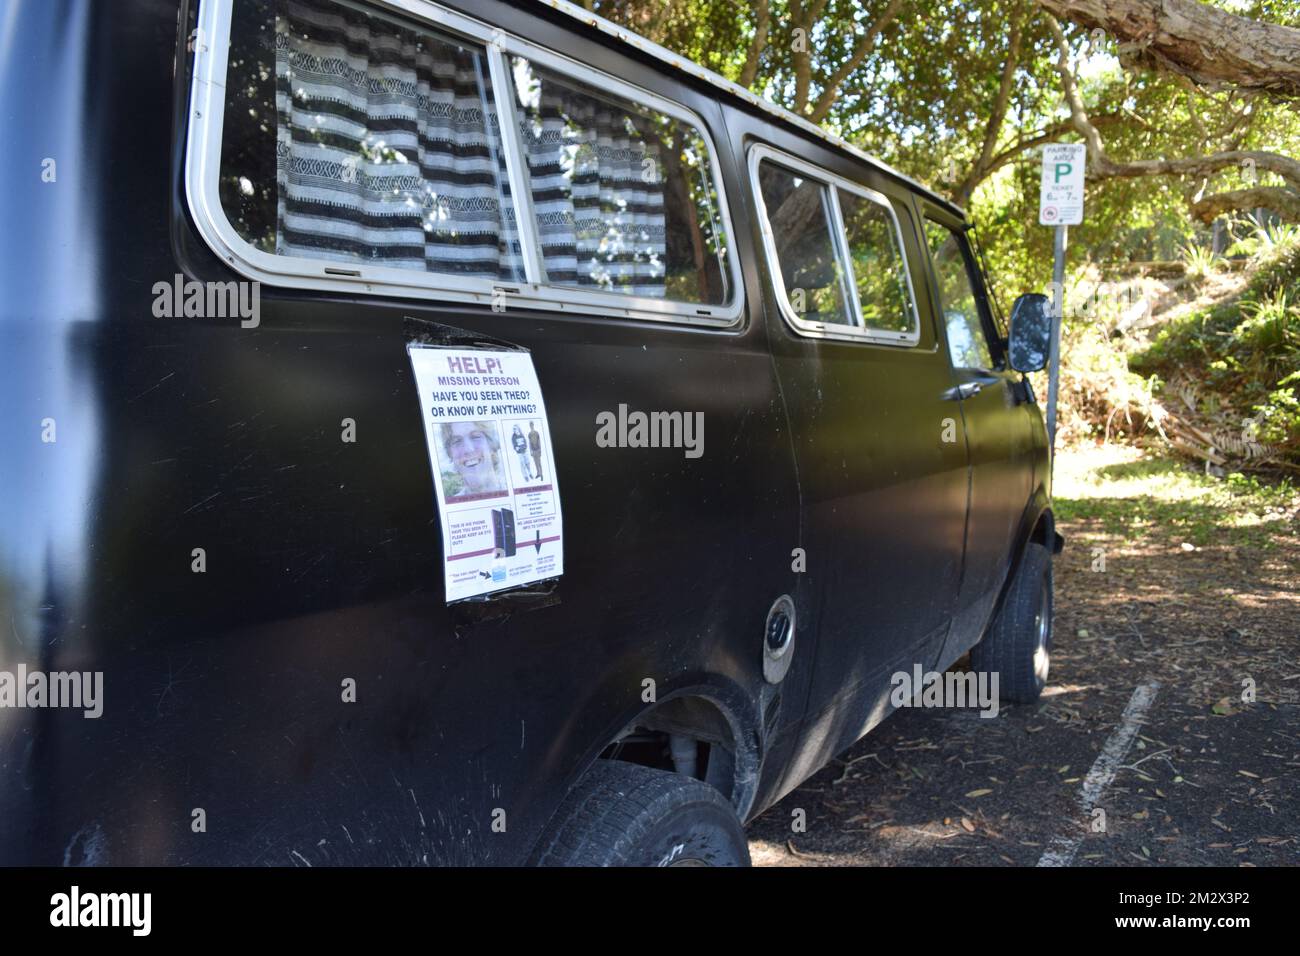 A van with a 'missing person' poster on it, pictured near Tallow Beach regarding the disappearance of 18-year old Theo Hayez, a Belgian student who was traveling in the area, in Byron Bay, Australia, Tuesday 02 July 2019. Hayez was last seen leaving Cheeky Monkey night club in Byron Bay, New South Wales on May 31. A team of Belgian researchers has traveled to Byron Bay to assist in the search for the missing boy. BELGA PHOTO MARIE-PAULINE DESSET  Stock Photo